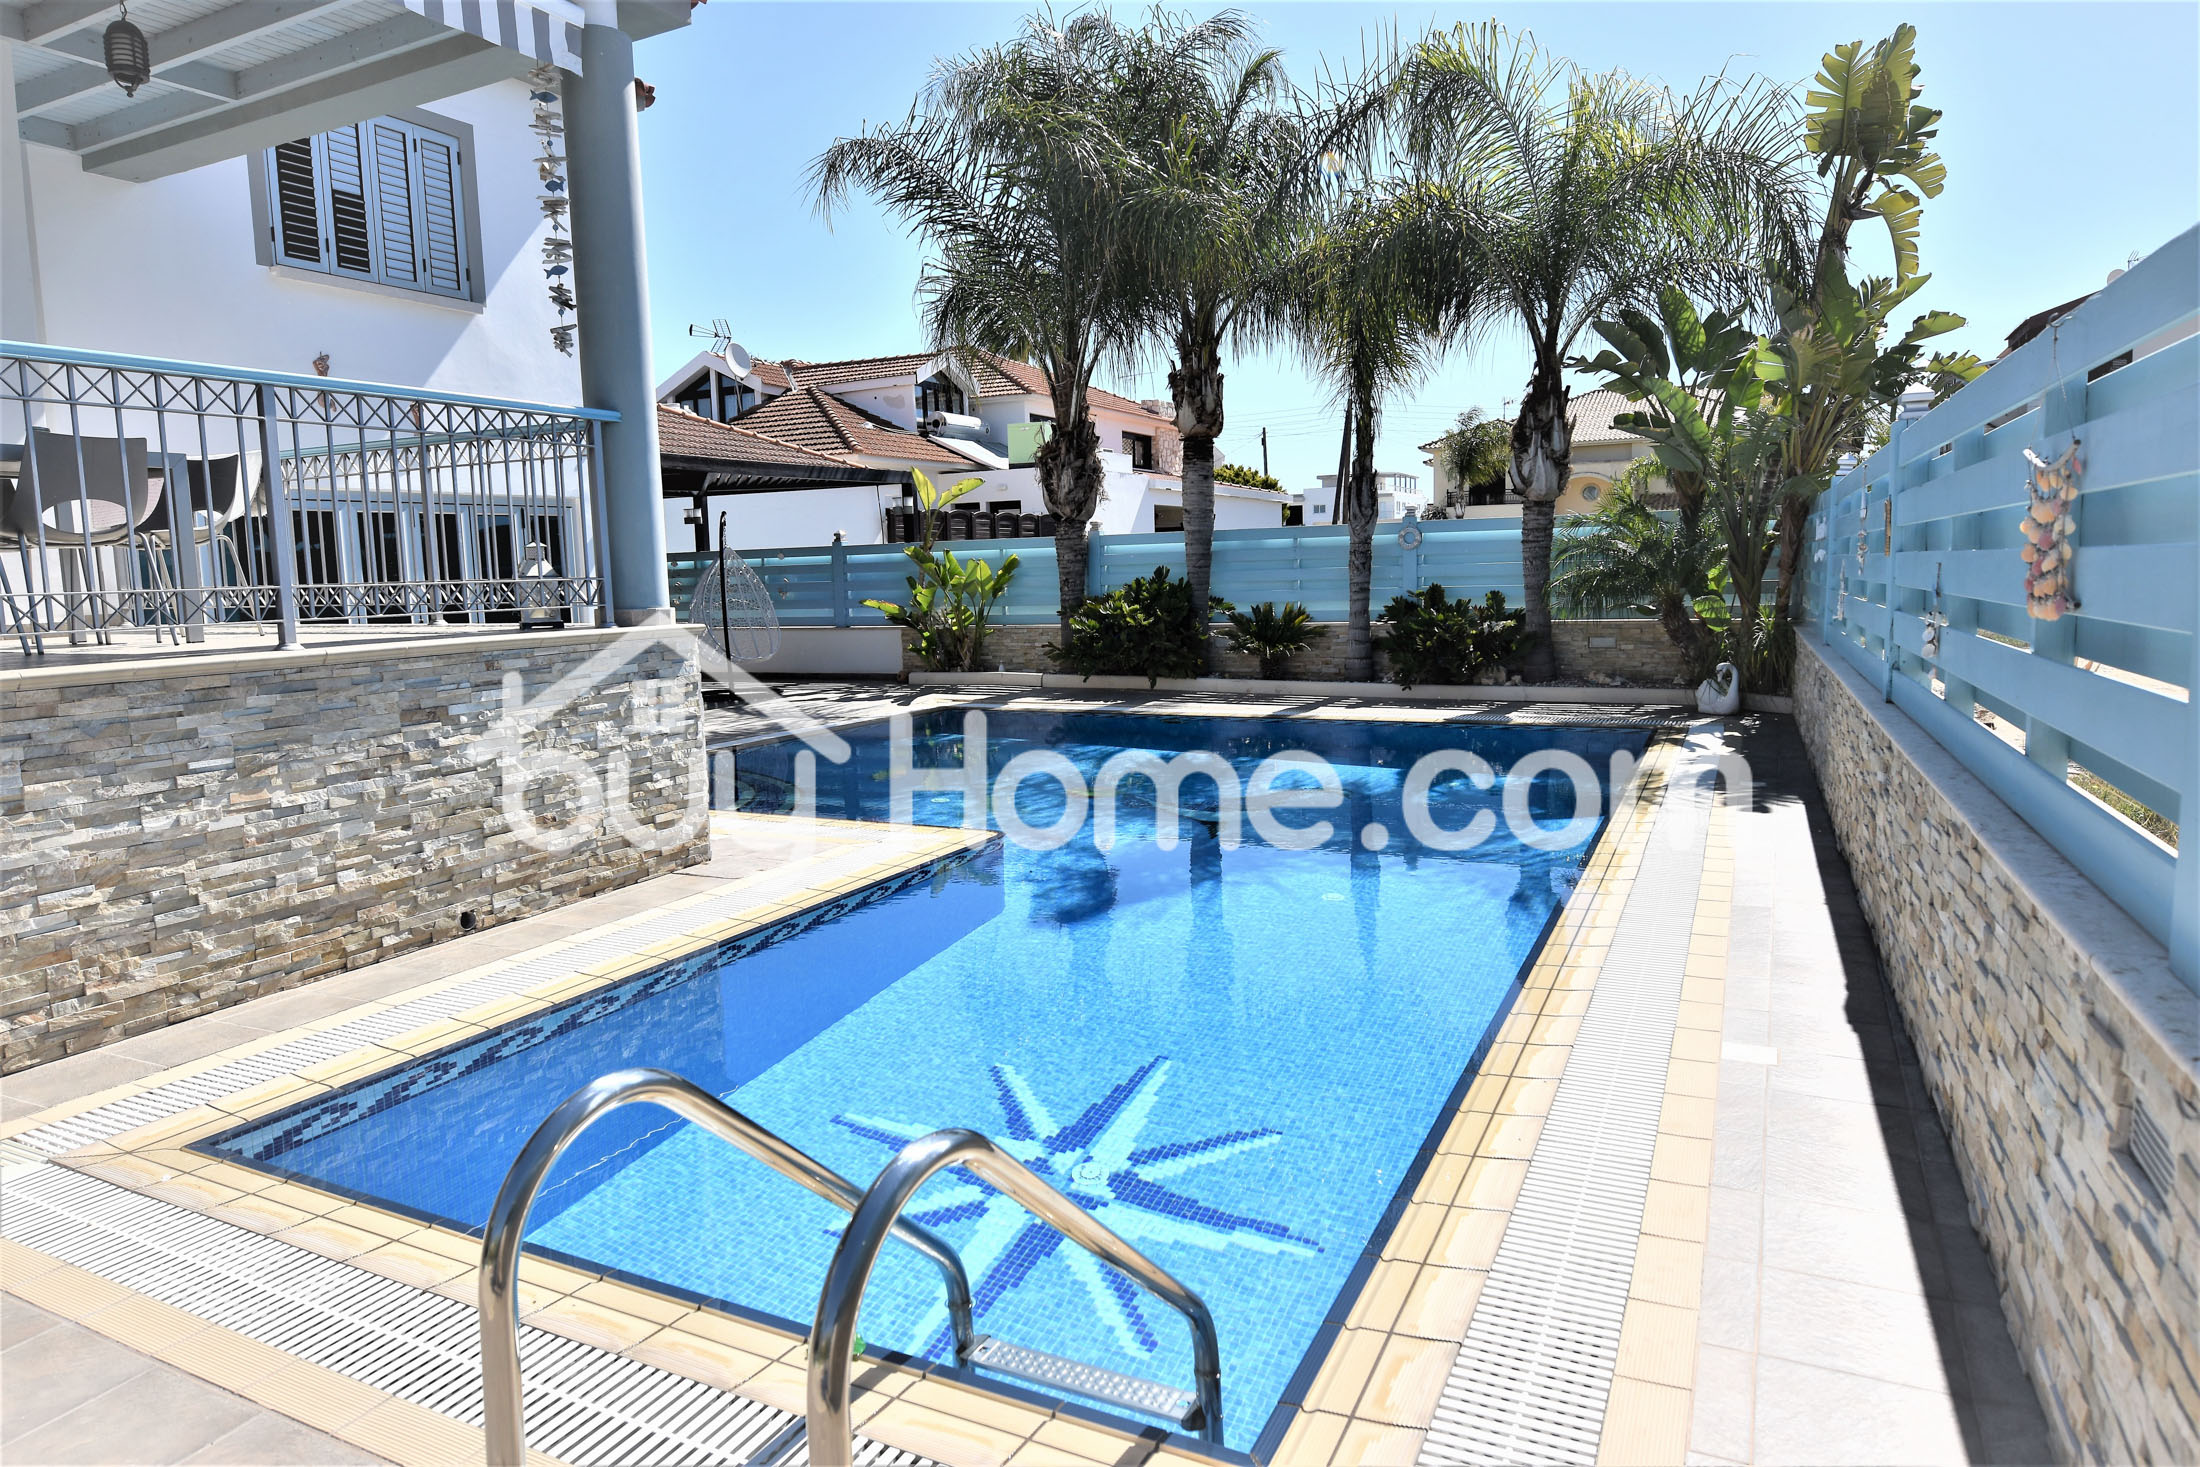 5 Bedroom House with Pool | BuyHome